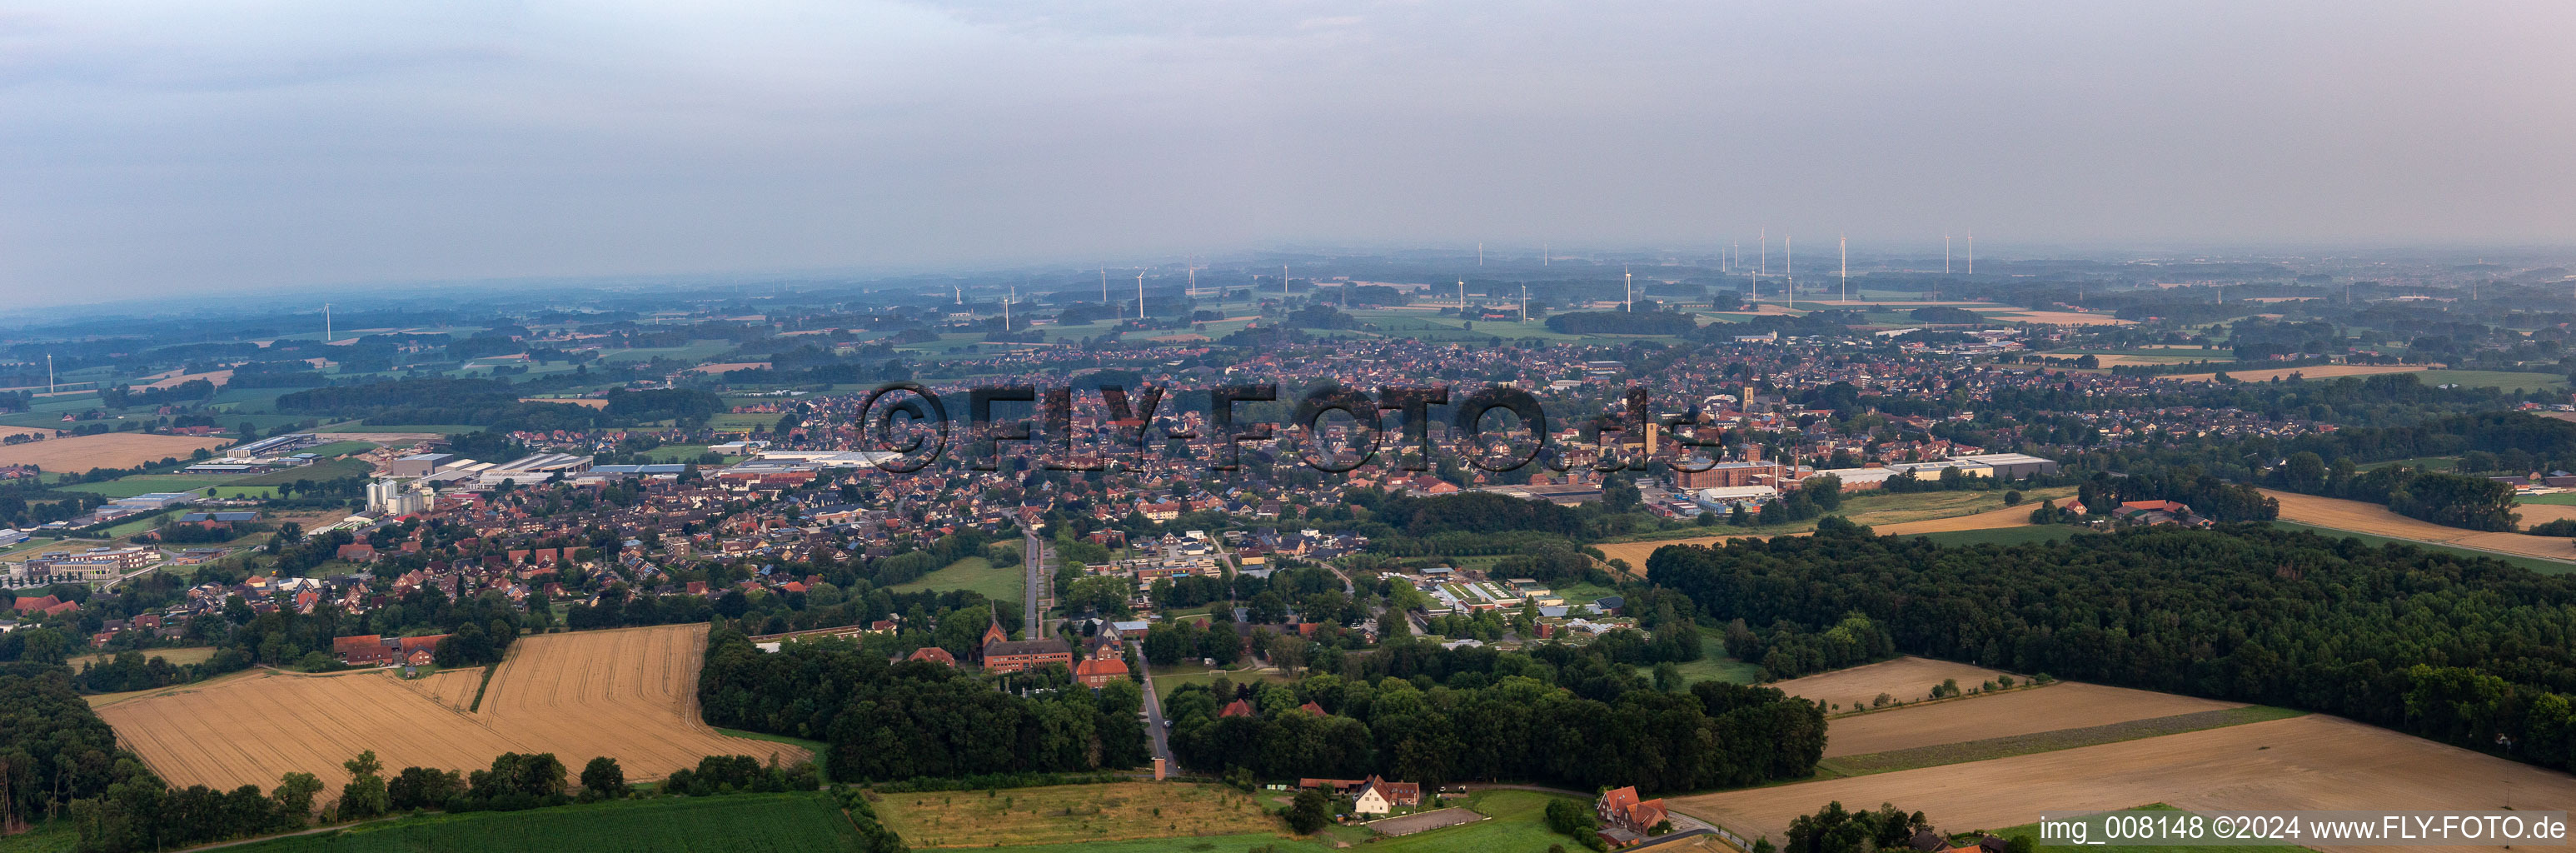 City area with outside districts and inner city area in Gescher in the state North Rhine-Westphalia, Germany